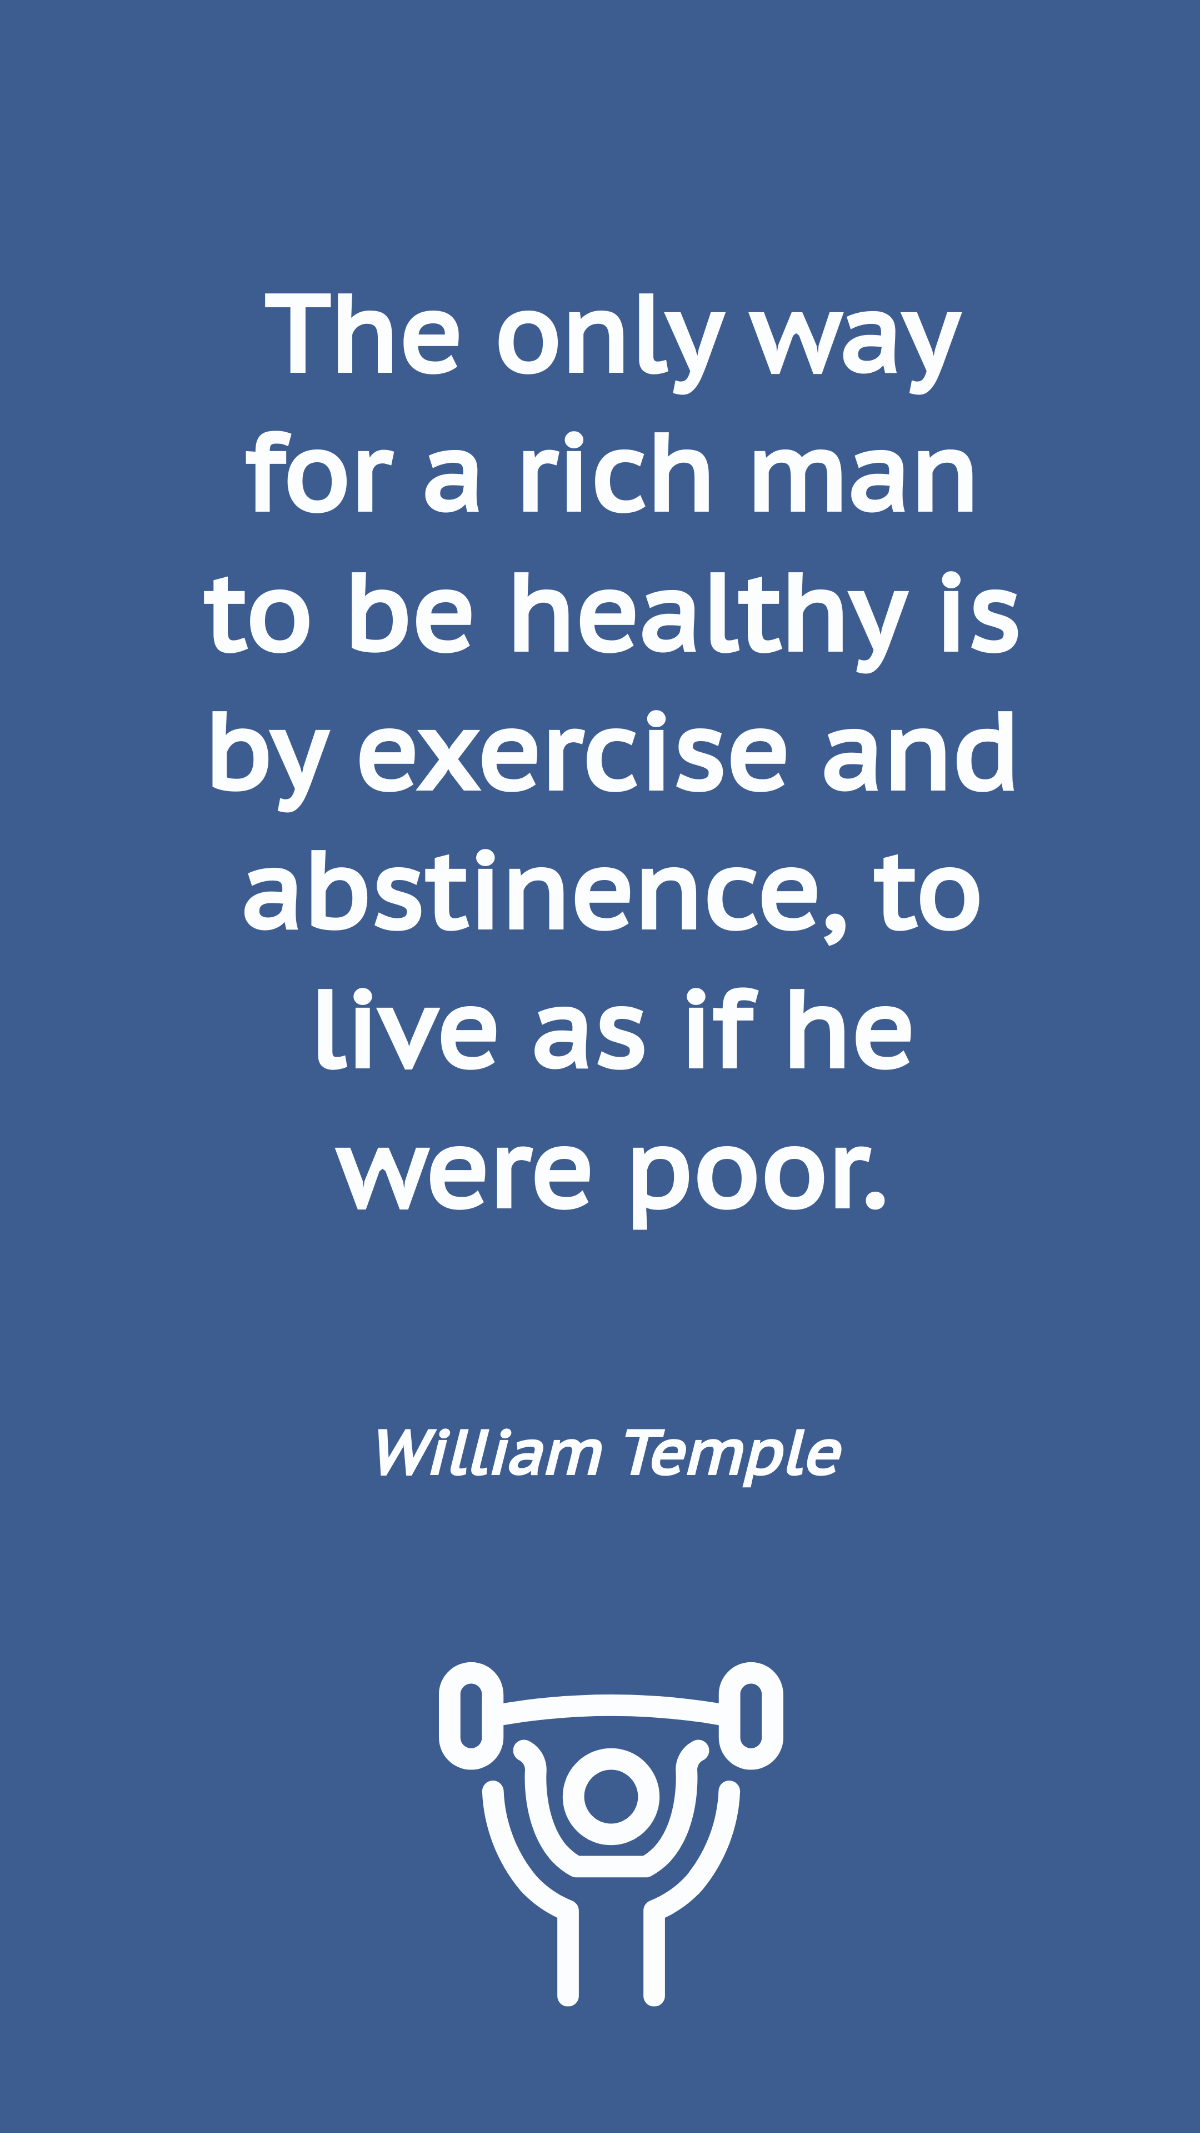 Free William Temple - The only way for a rich man to be healthy is by exercise and abstinence, to live as if he were poor. Template